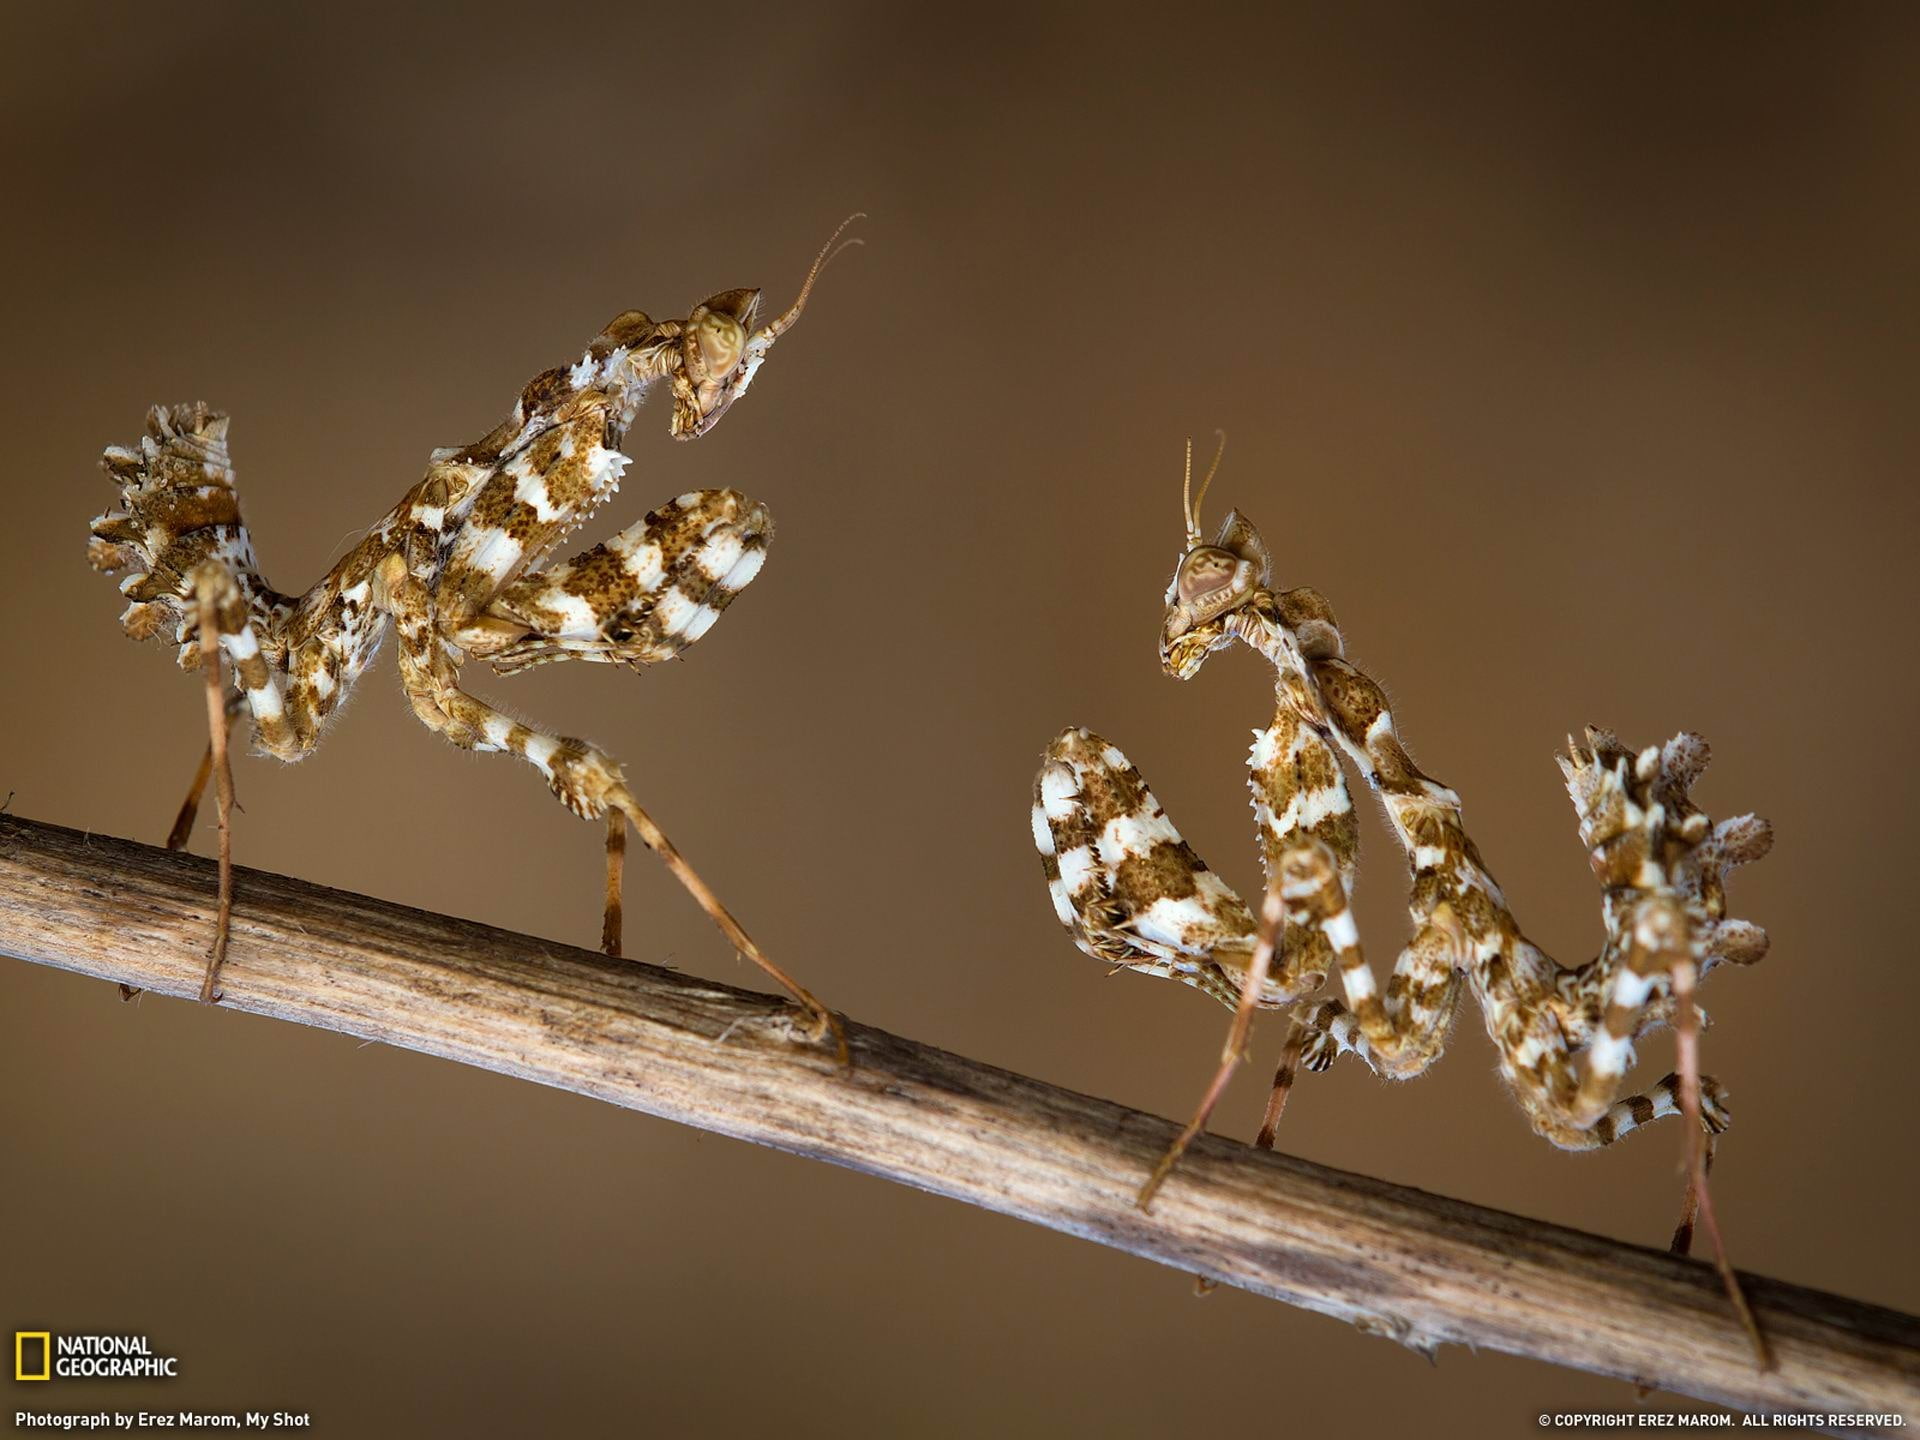 Thistle Mantis Nymphs Israel-National Geographic W.., two brown-and-white striped praying mantis